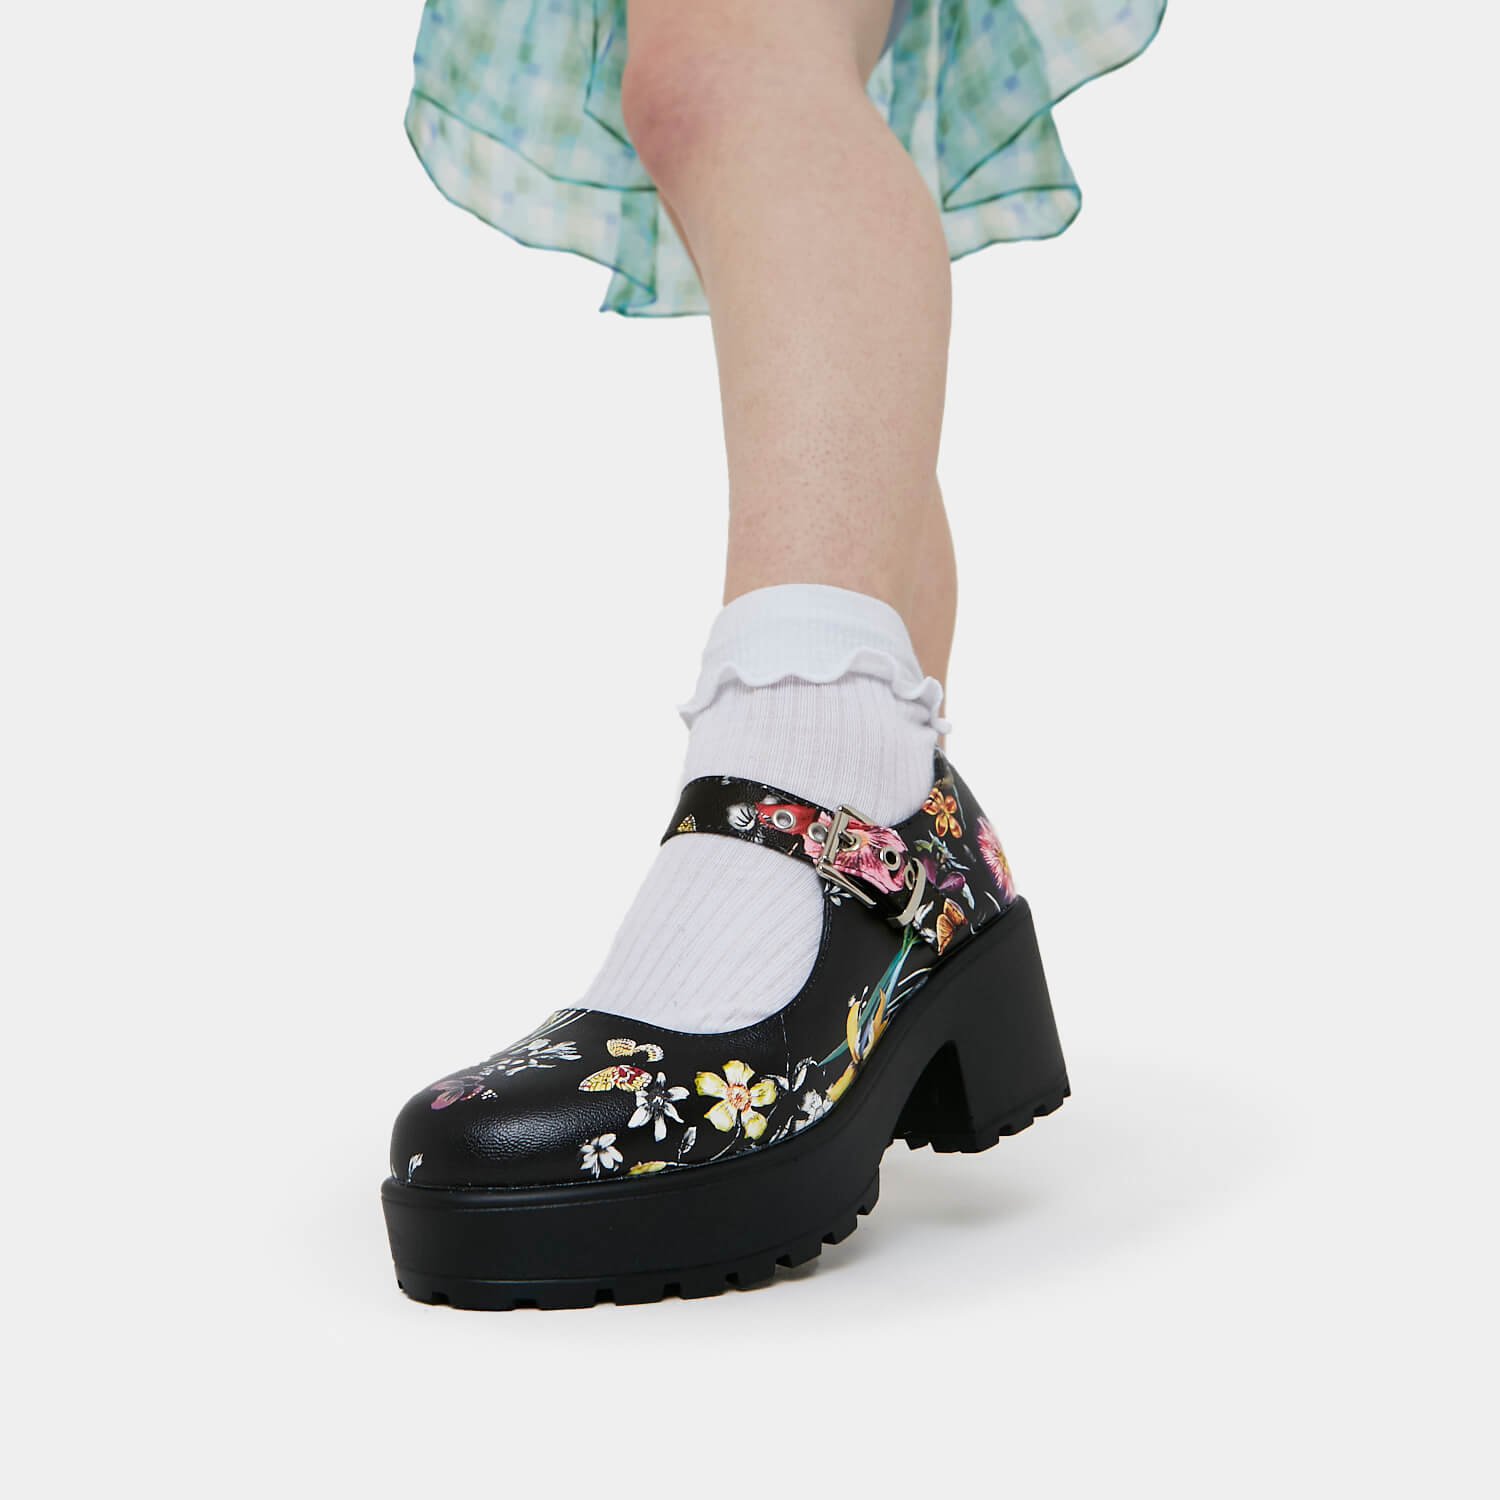 Tira Mary Jane Shoes 'Floral Edition' - Mary Janes - KOI Footwear - Black - Model Front View